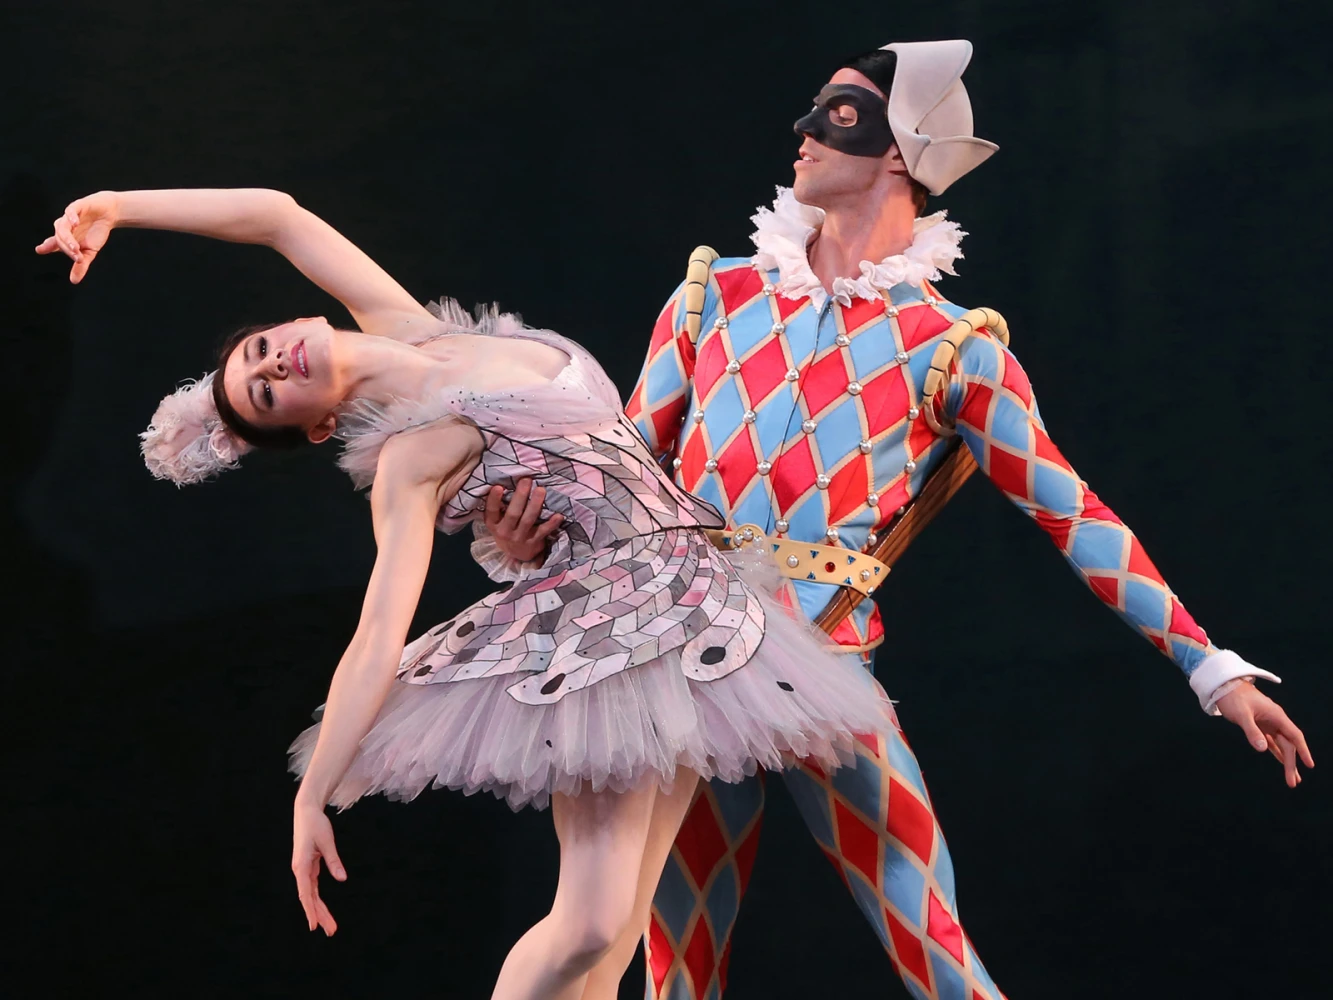 The Australian Ballet presents Harlequinade: What to expect - 2